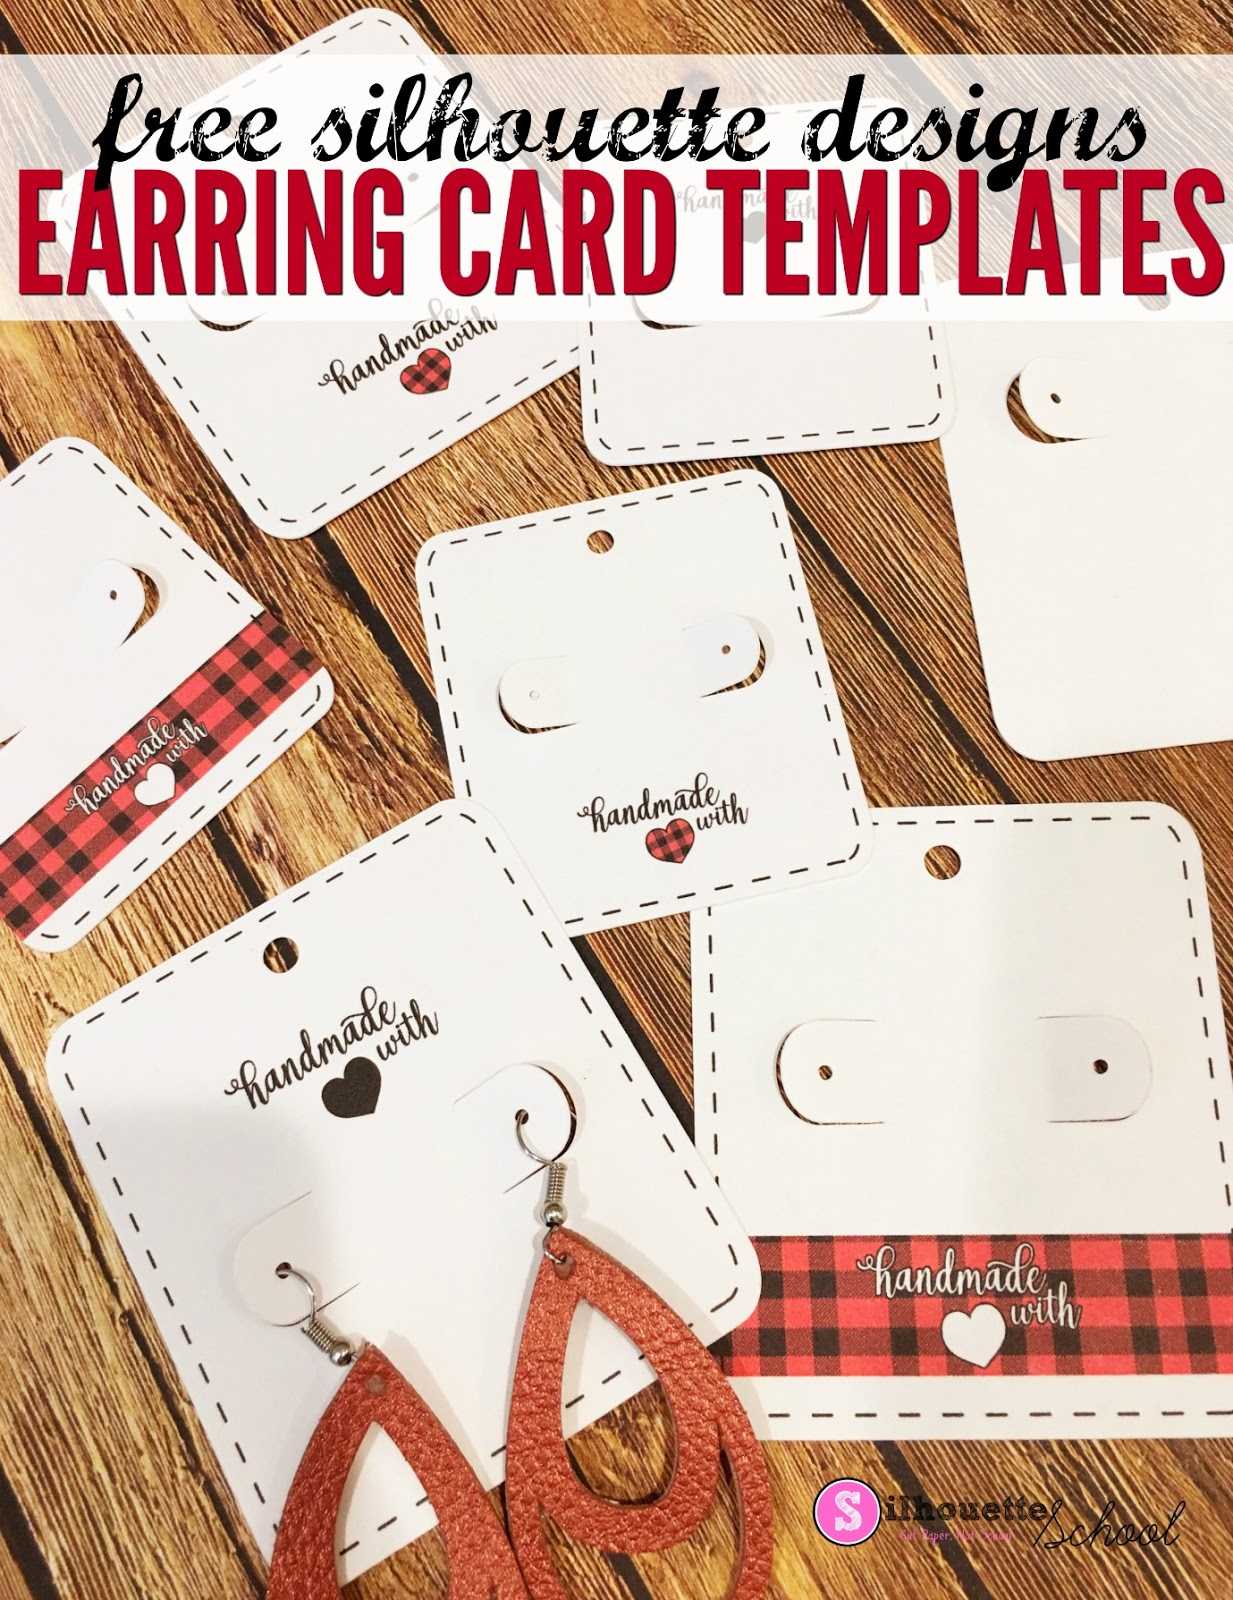 Free Silhouette Earring Card Templates (Set Of 8 With Free Svg Card Templates